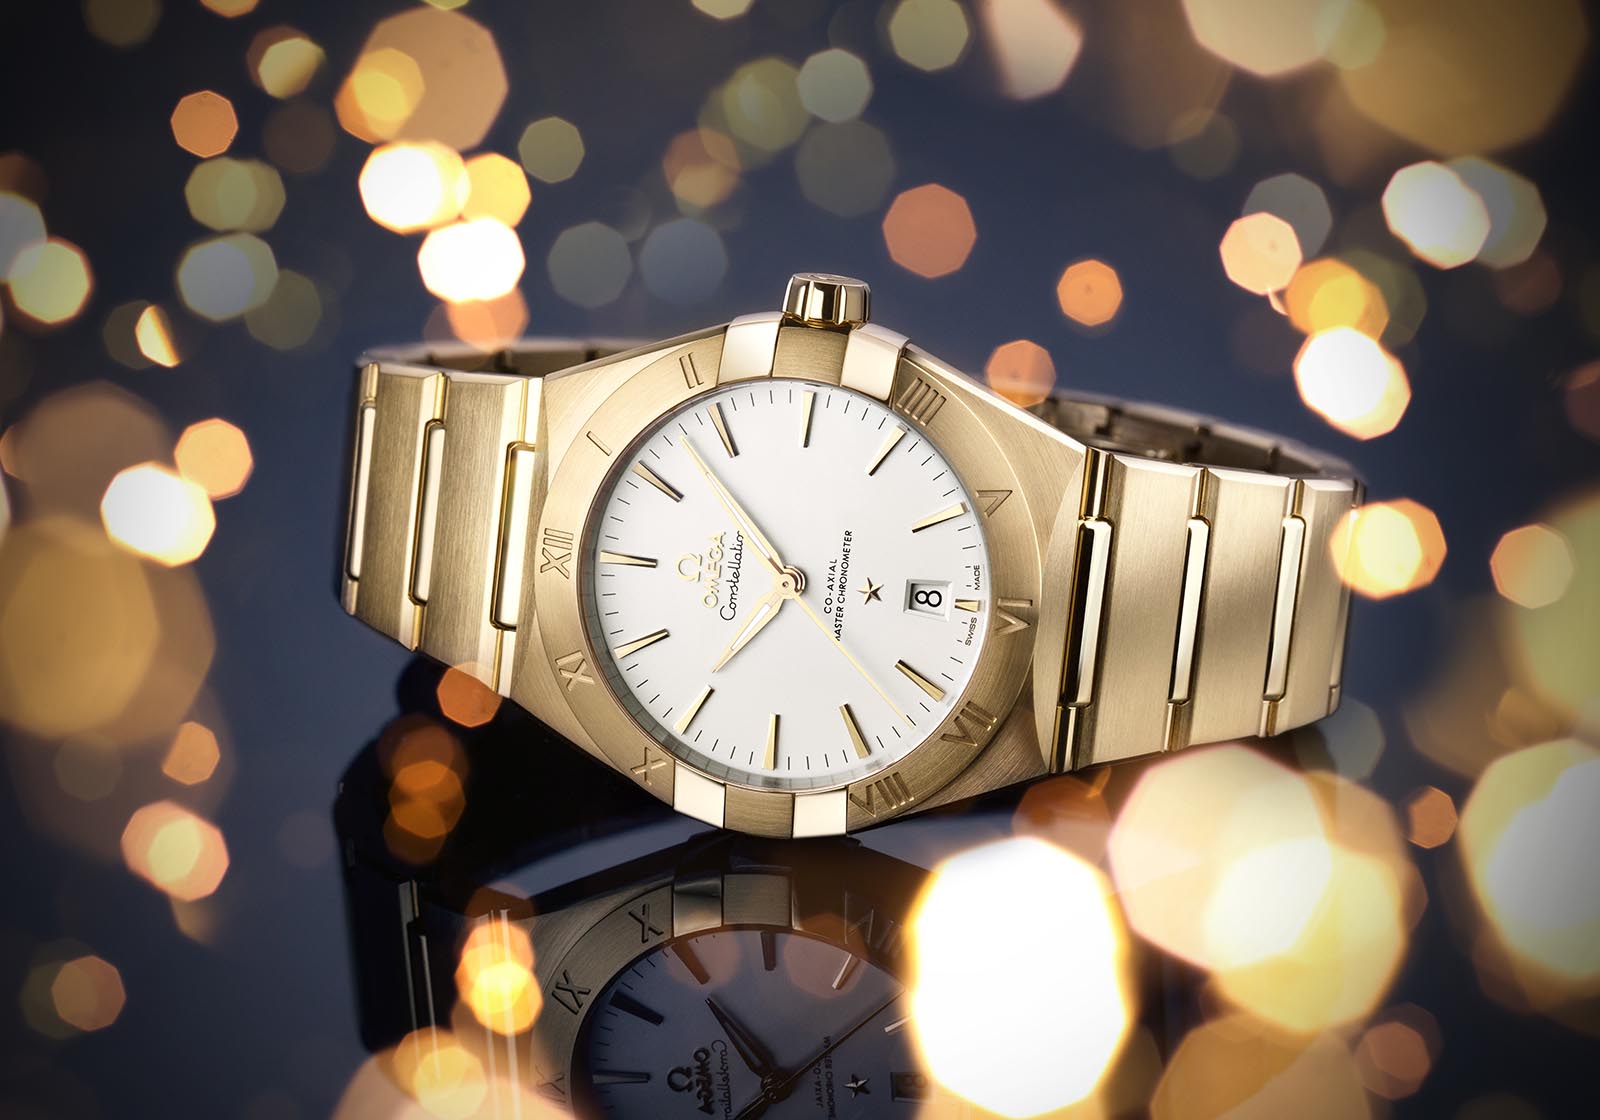 omega constellation gold watch price